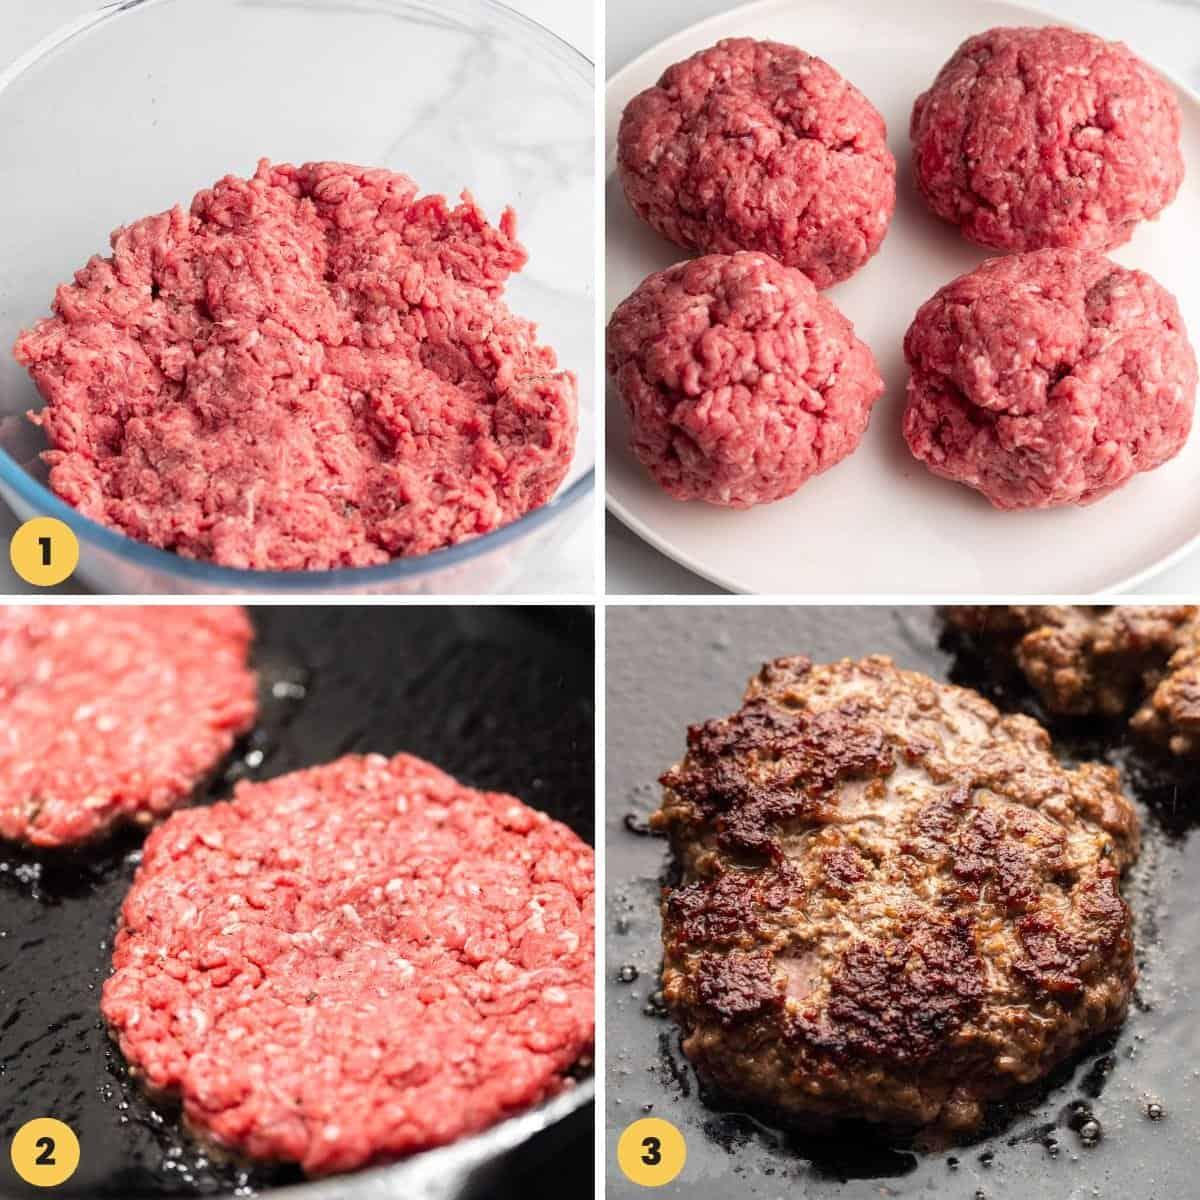 A collage of images showing how to make hamburgers on the stove.